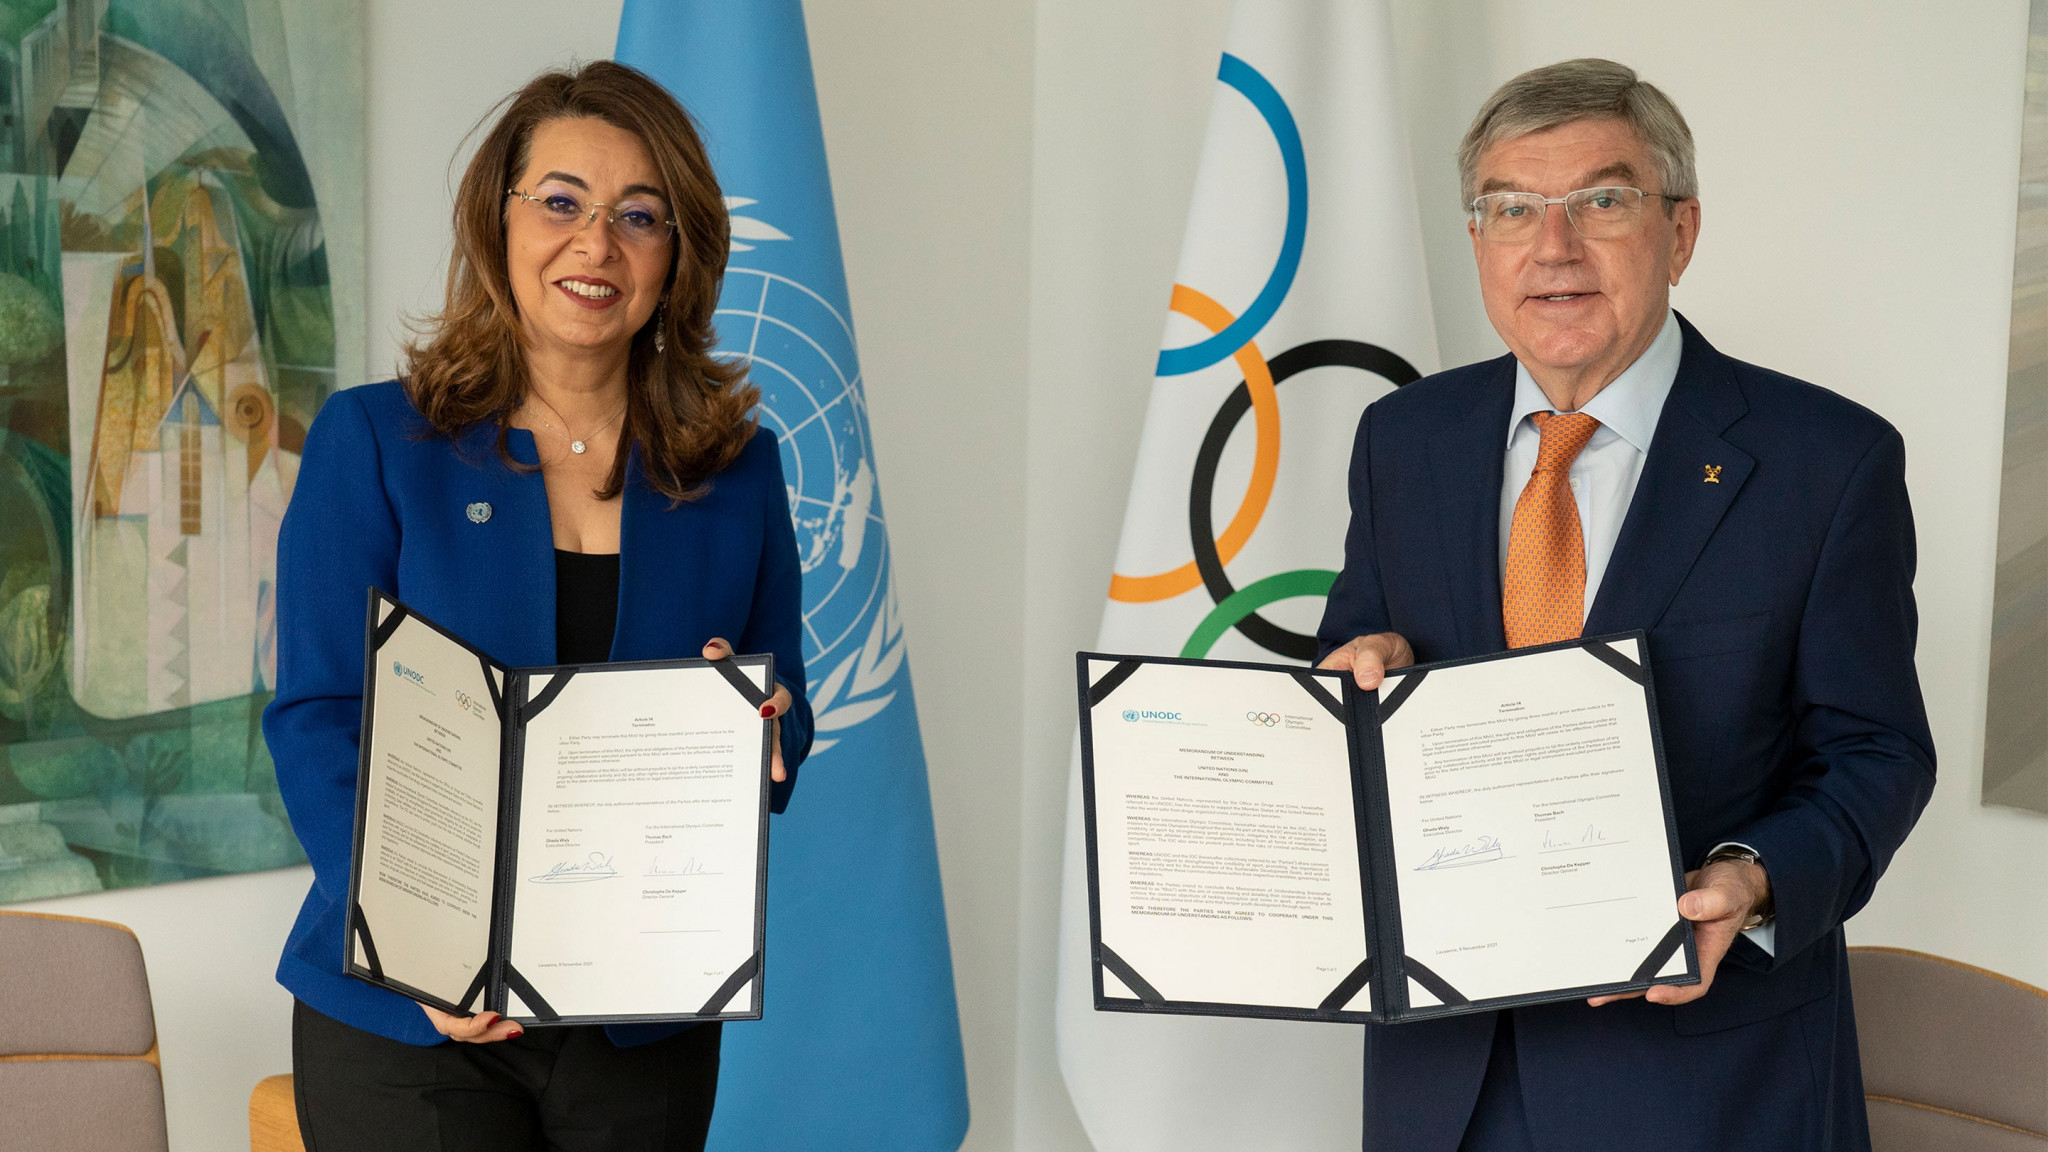 The United Nations Office on Drugs and Crime and the IOC have renewed their Memorandum of Understanding today in the battle against corruption and crime in sport ©IOC